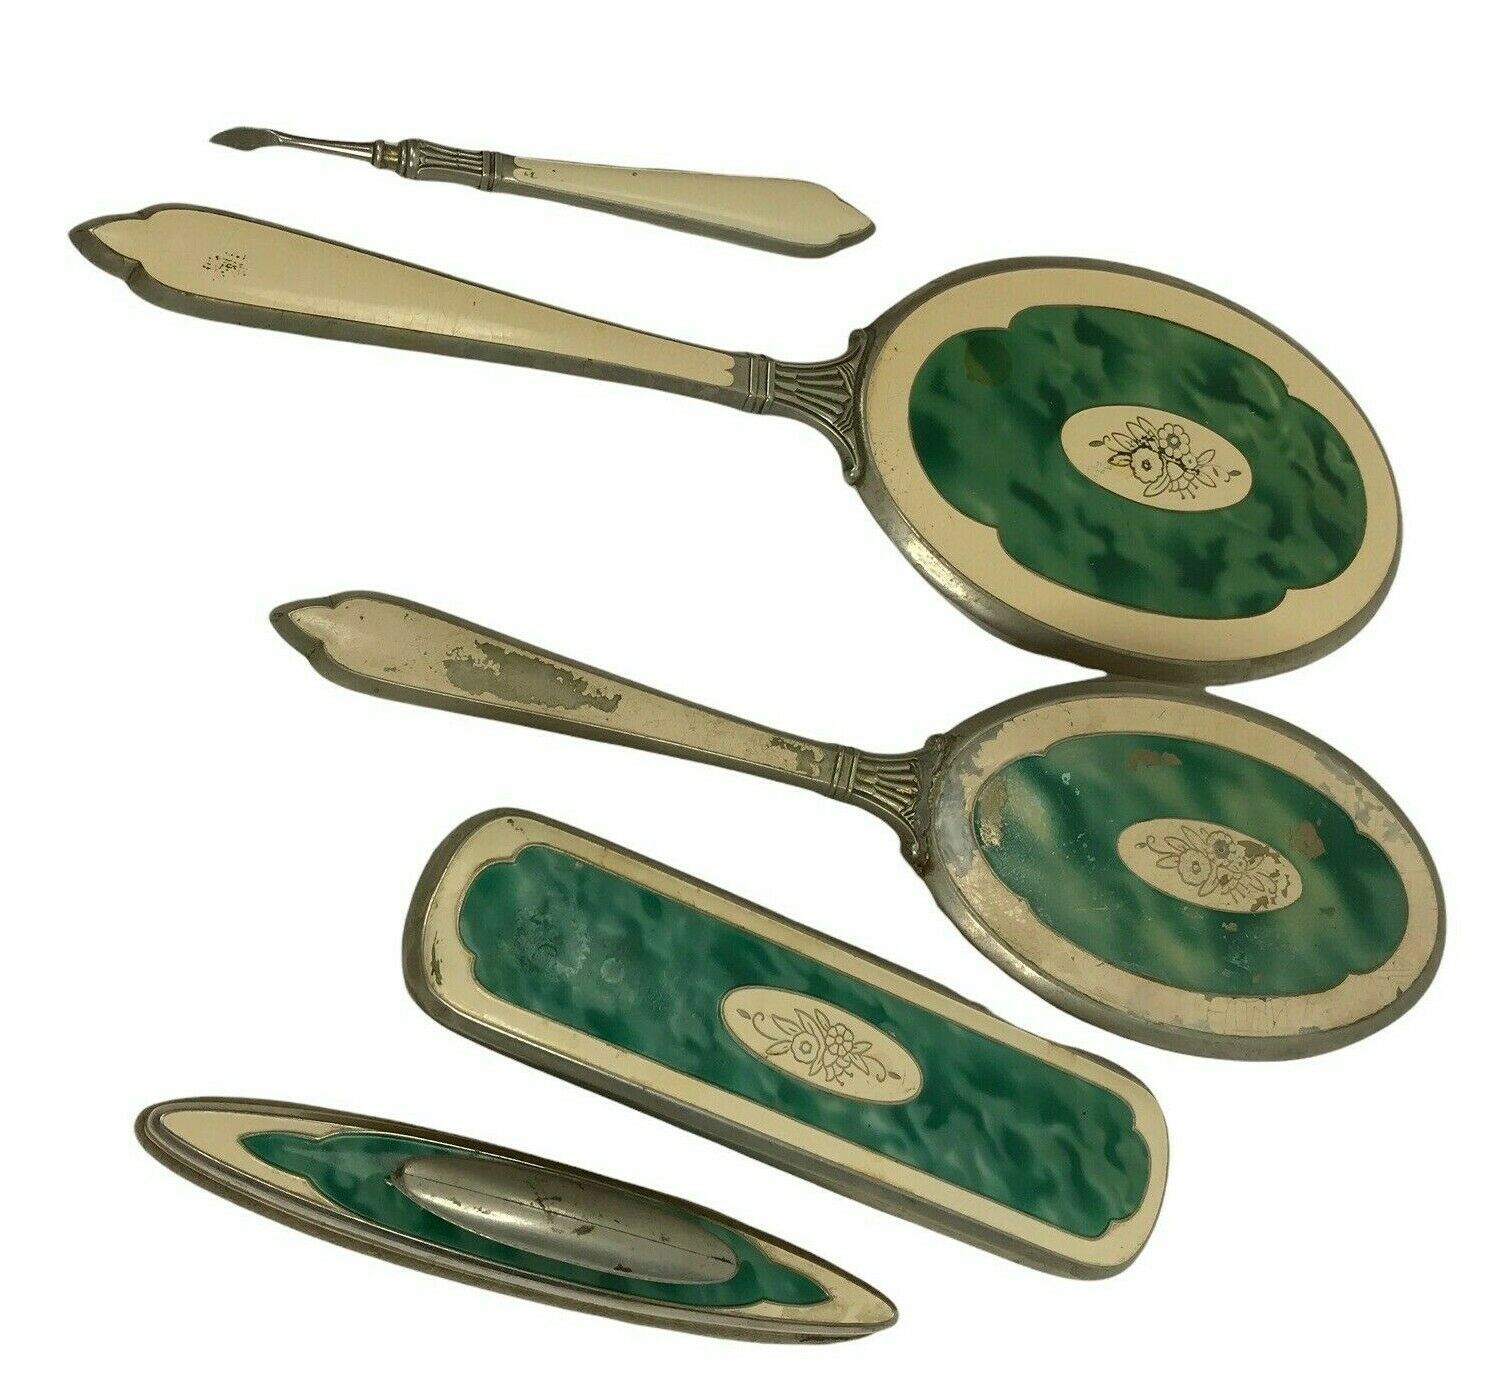 Primary image for Vintage Vanity Set Metal Brush Mirror Buffer Green Deco nouveau floral shabby